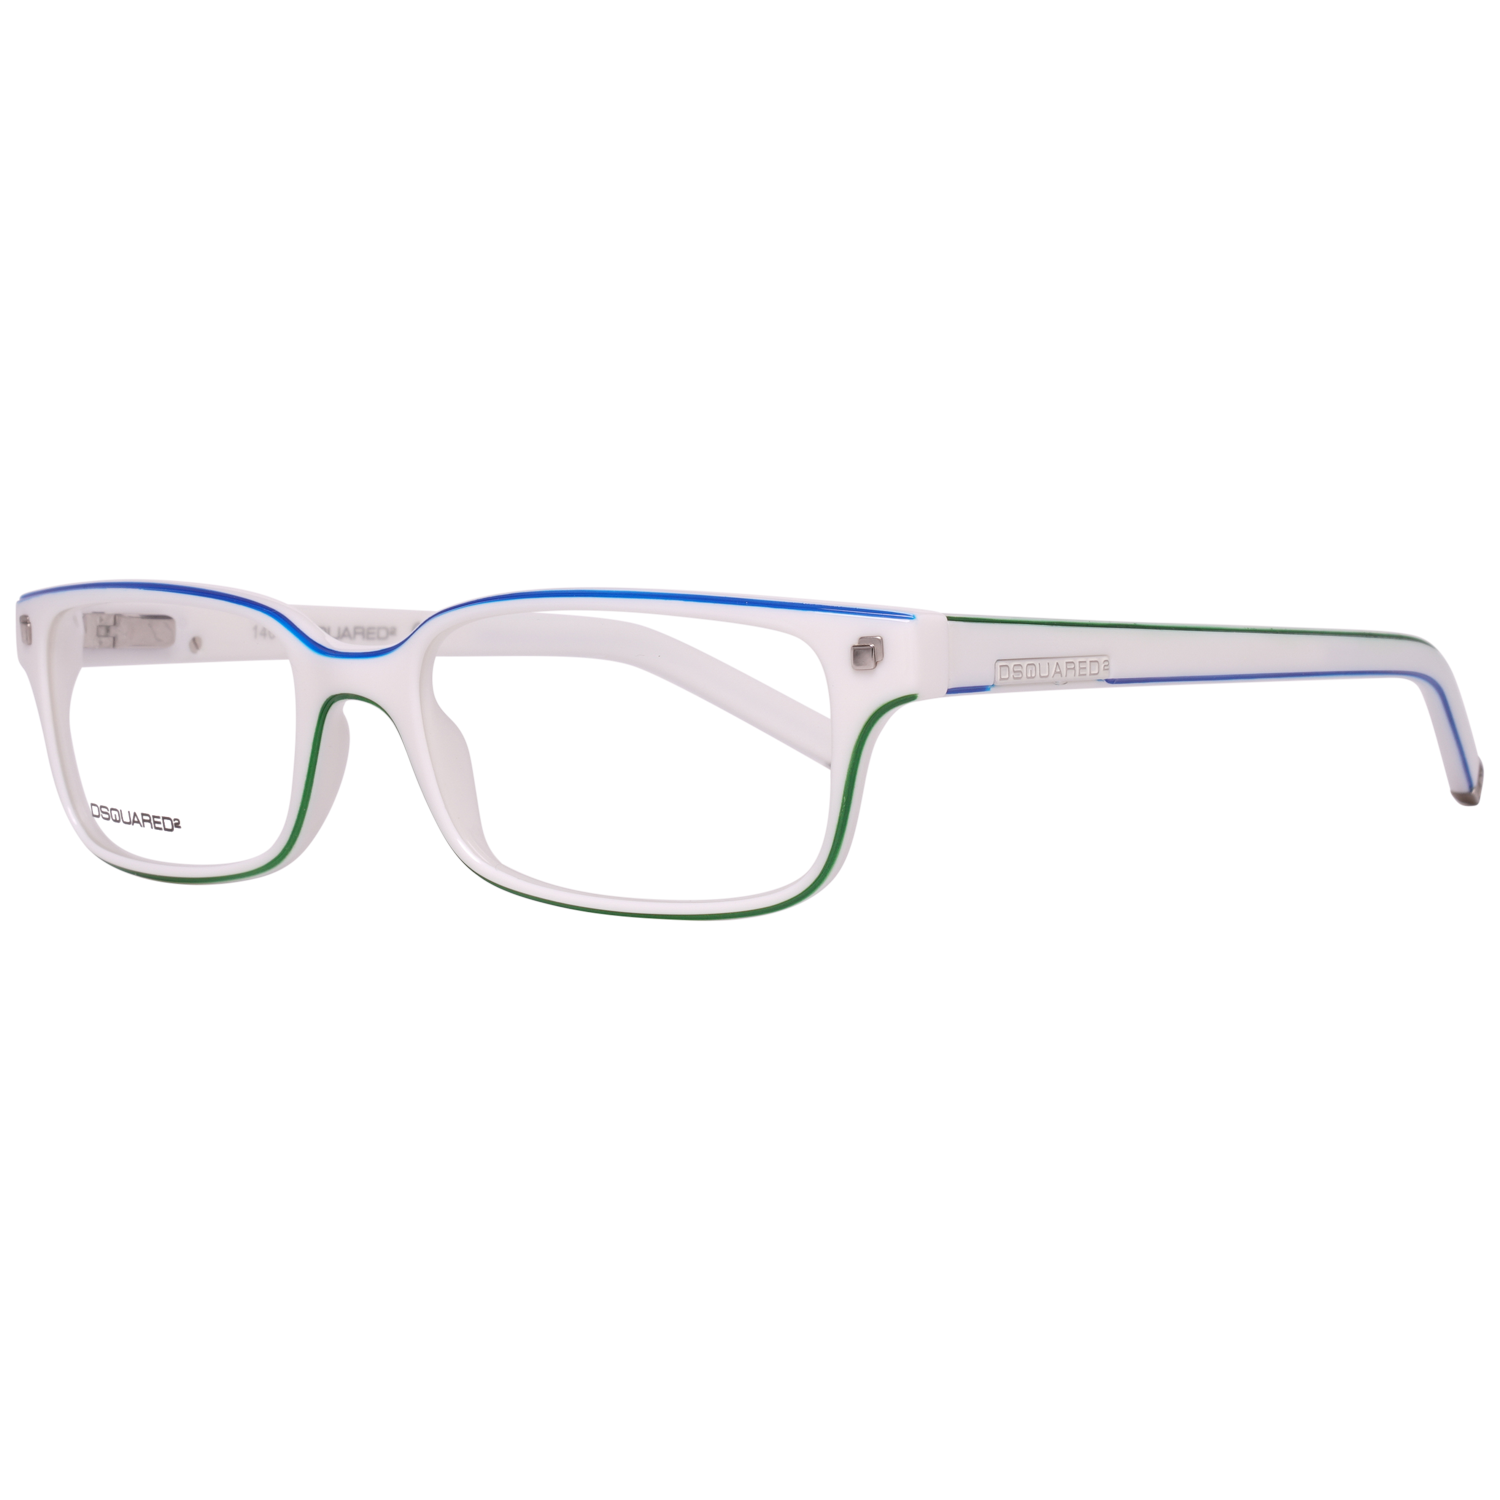 Dsquared2 Optical Frame DQ5018 021 52